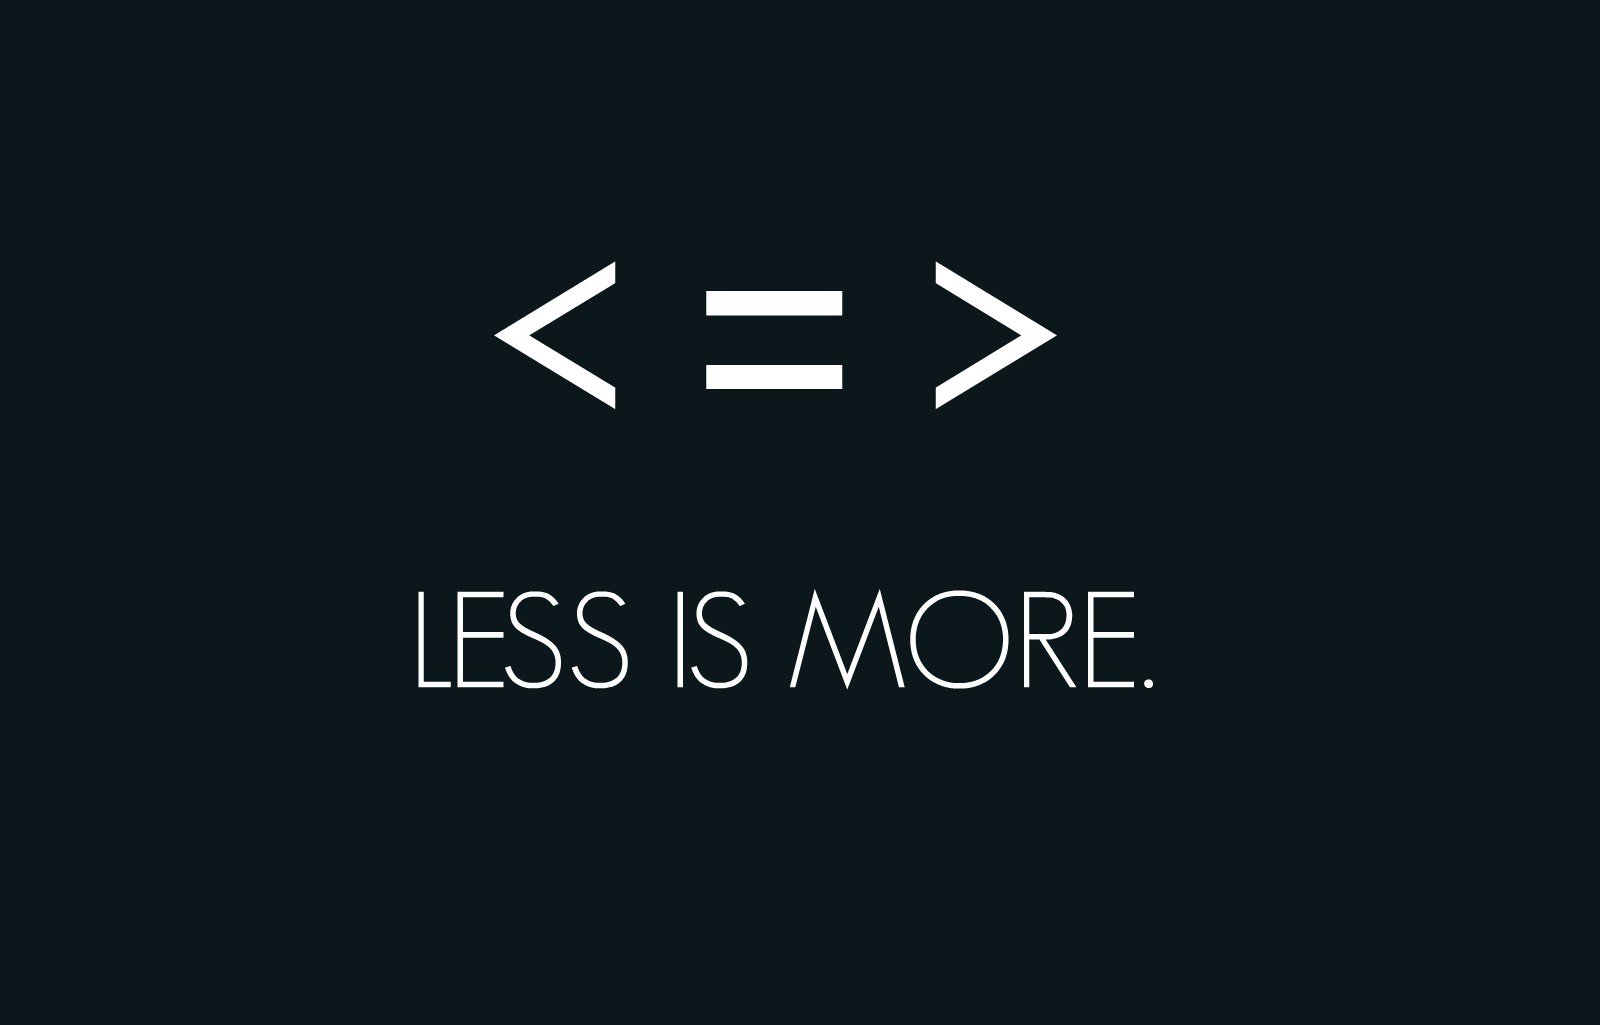 Sometimes, less is more...